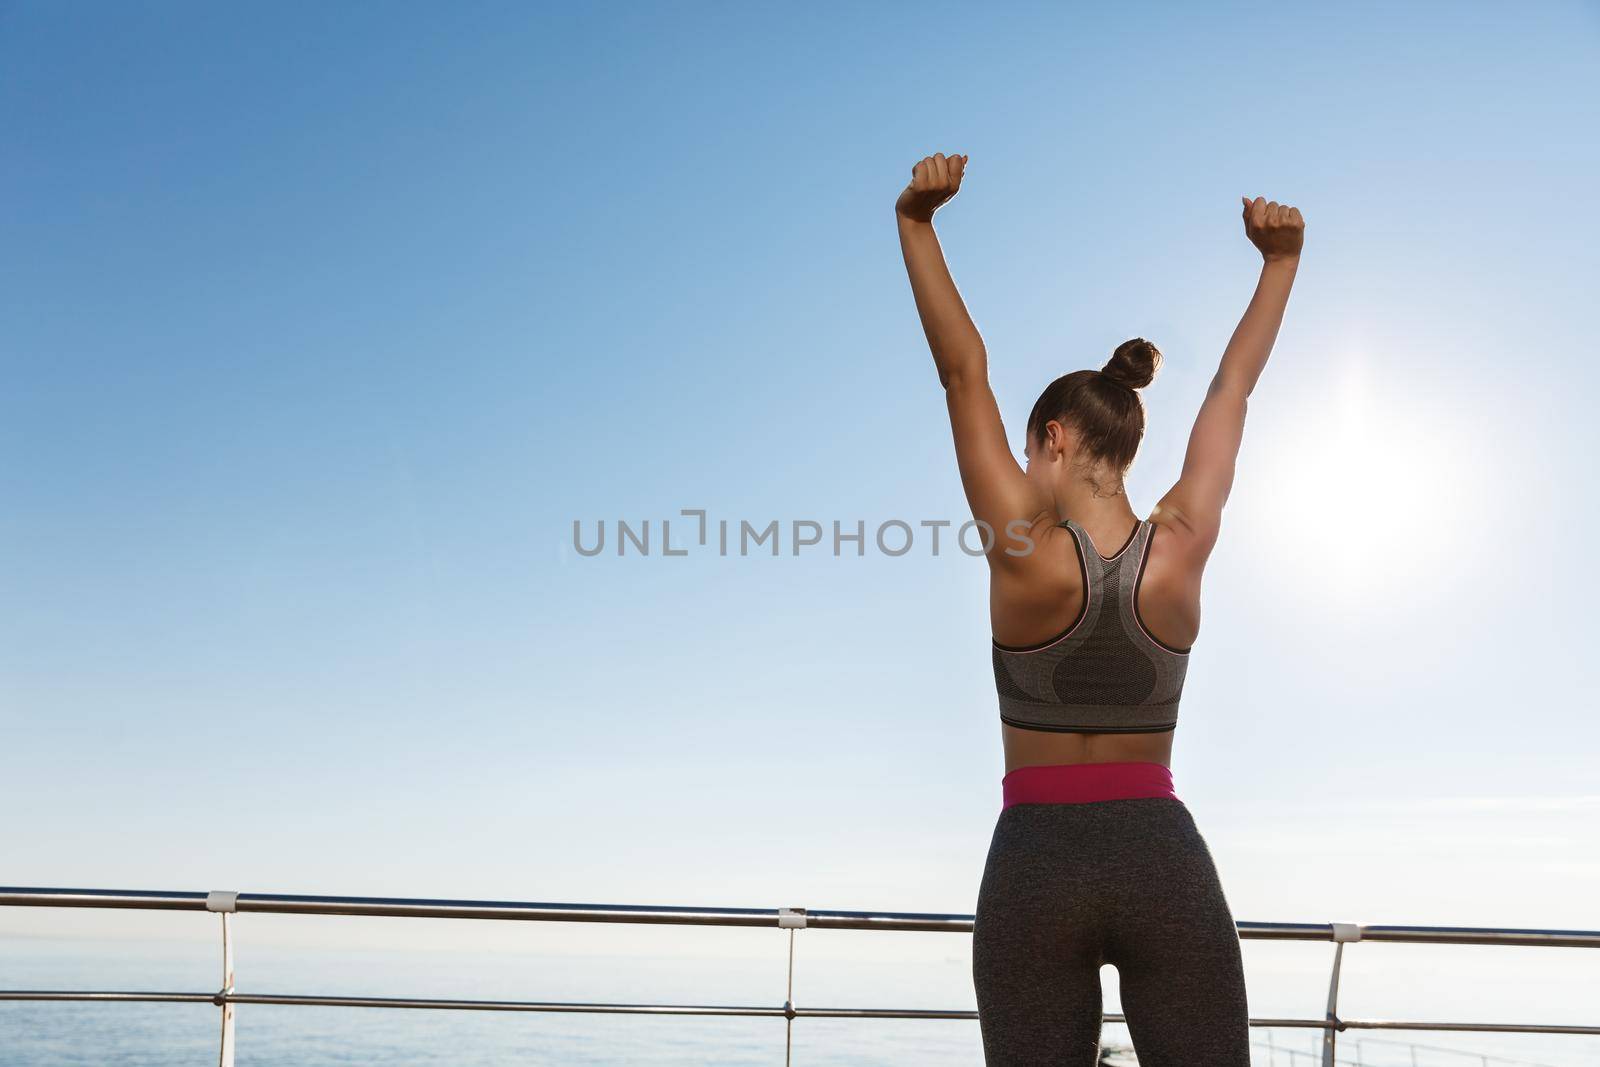 Rear view of happy triumphing sportswoman standing on a pier, raising hands up like champion, achieve goal during training session outdoors.